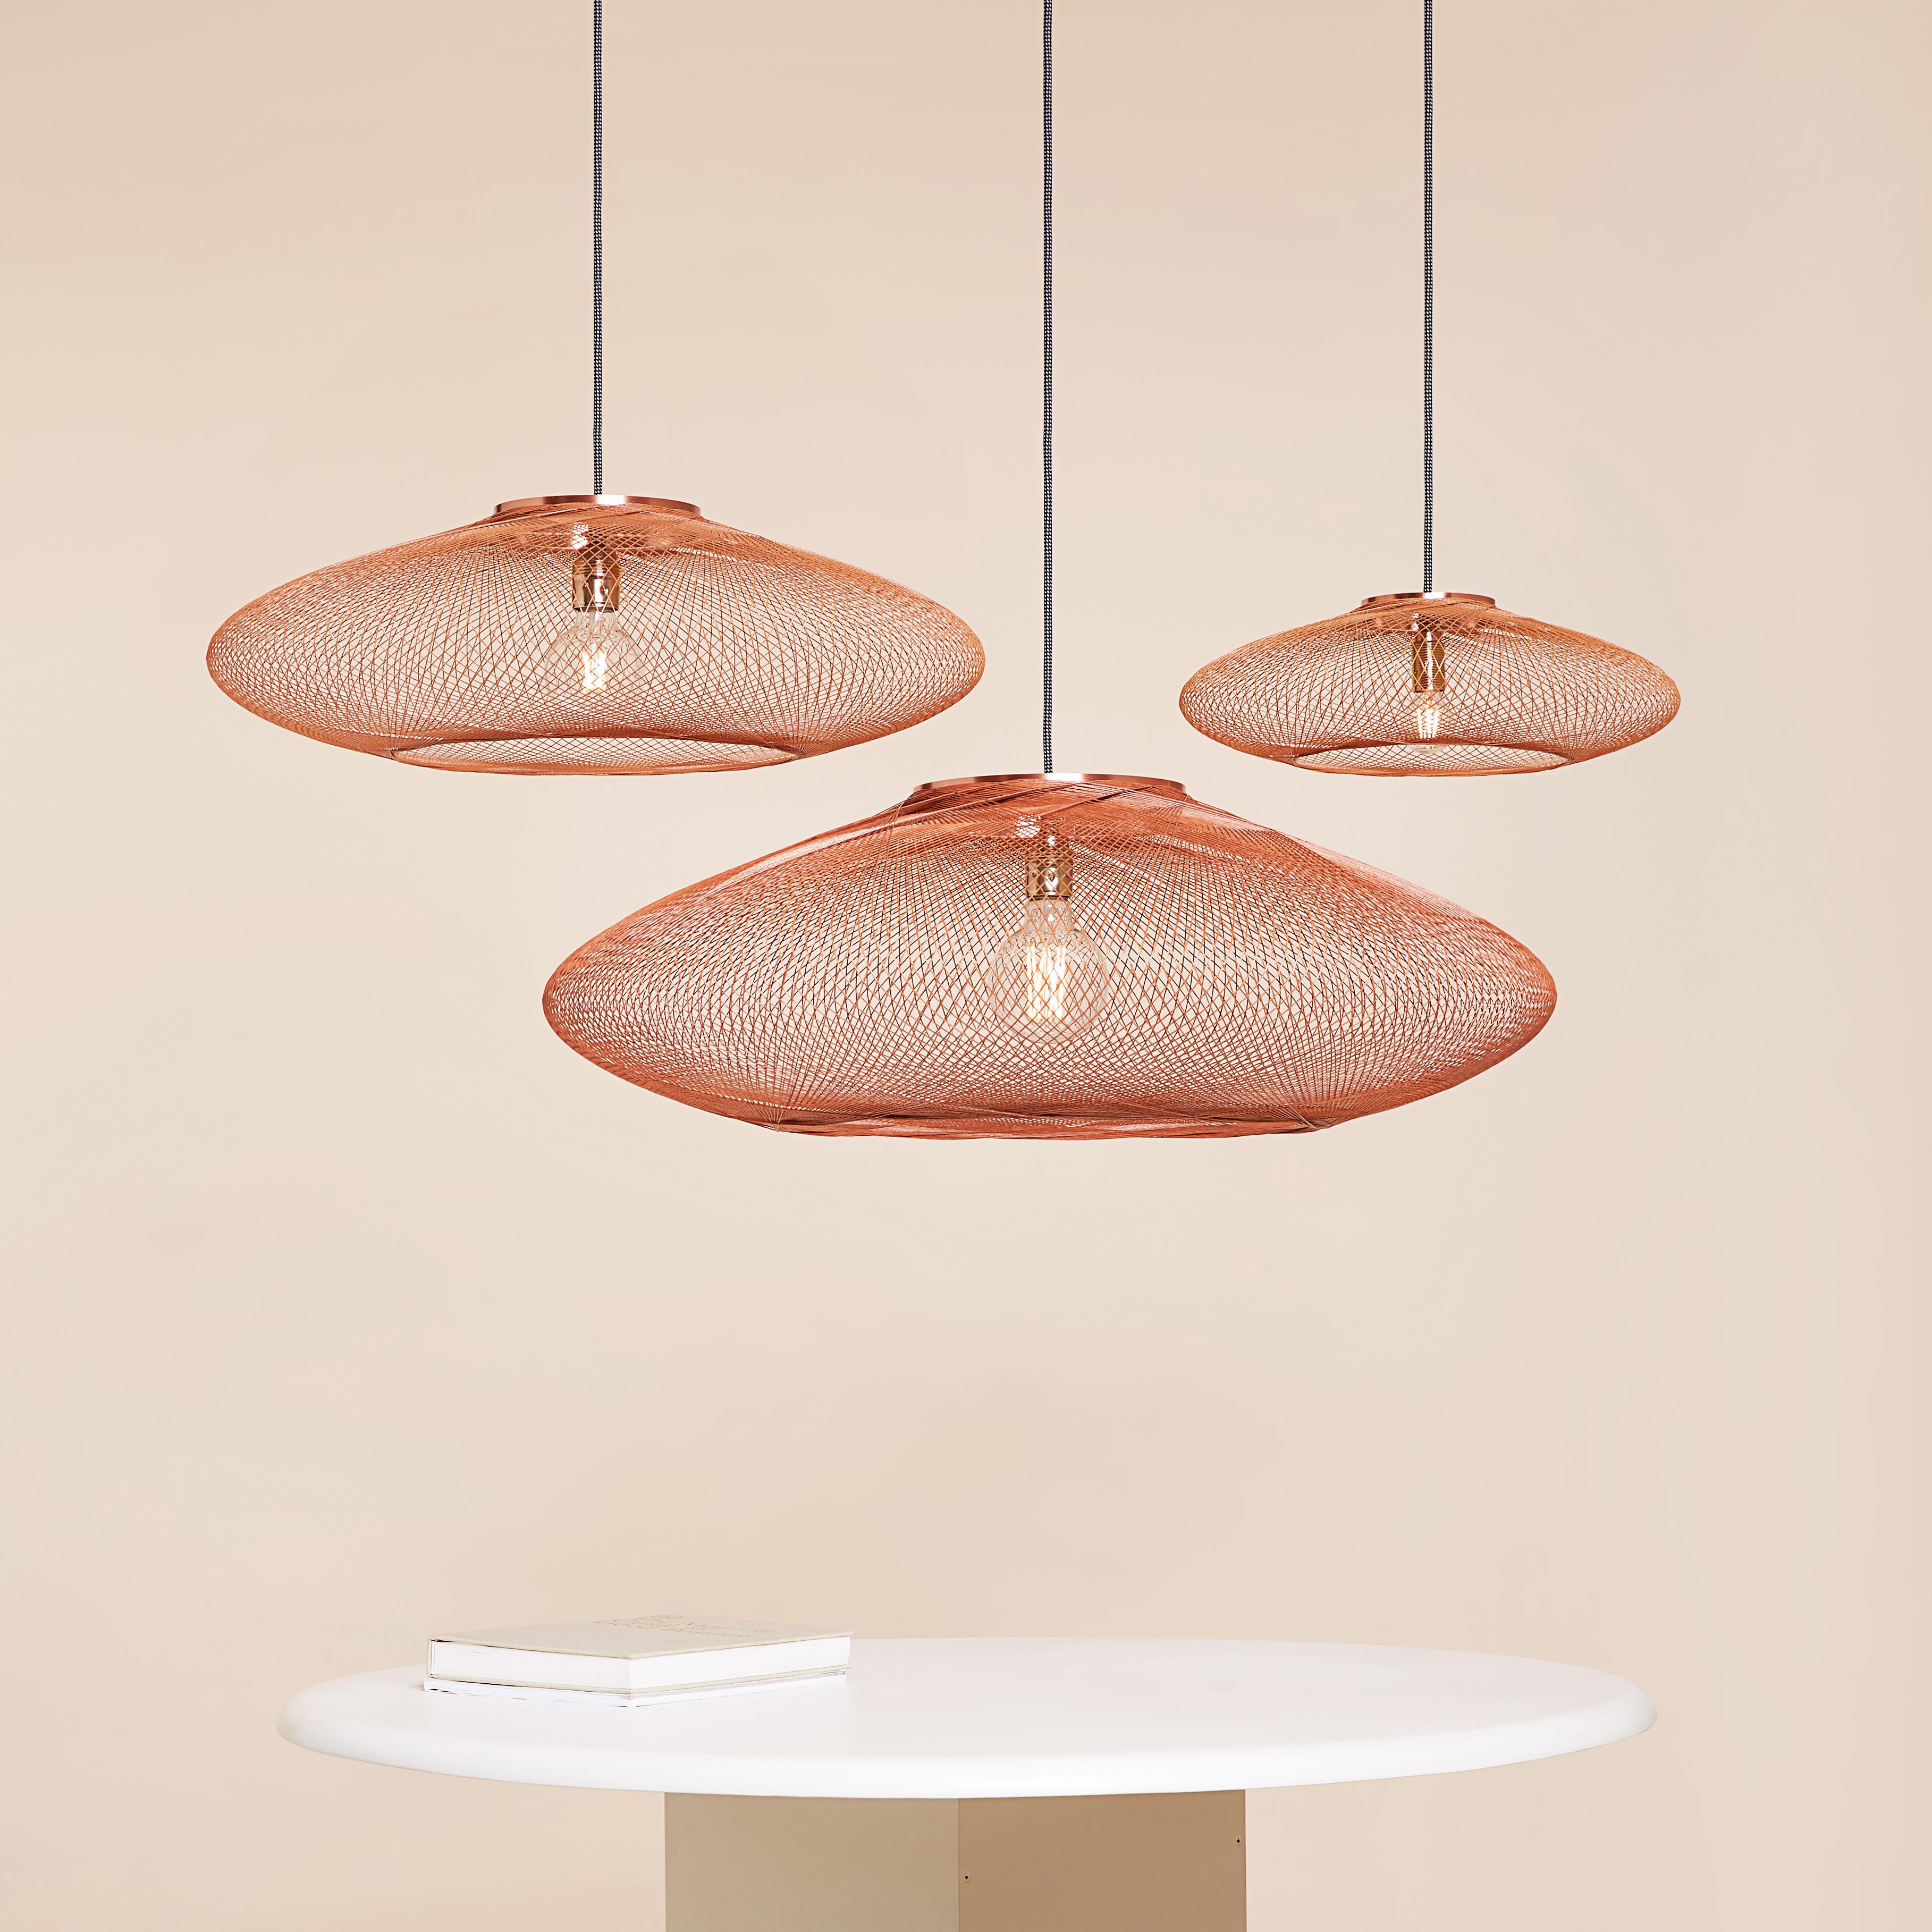 Medium Copper UFO pendant lamp by Atelier Robotiq
Dimensions: D 60 x H 18 cm
Materials: Resin-impregnated industrial fiber, brass.
Available with holder in copper/ brass/ black coated stainless steel.
Available in different colors, 3 sizes, and in